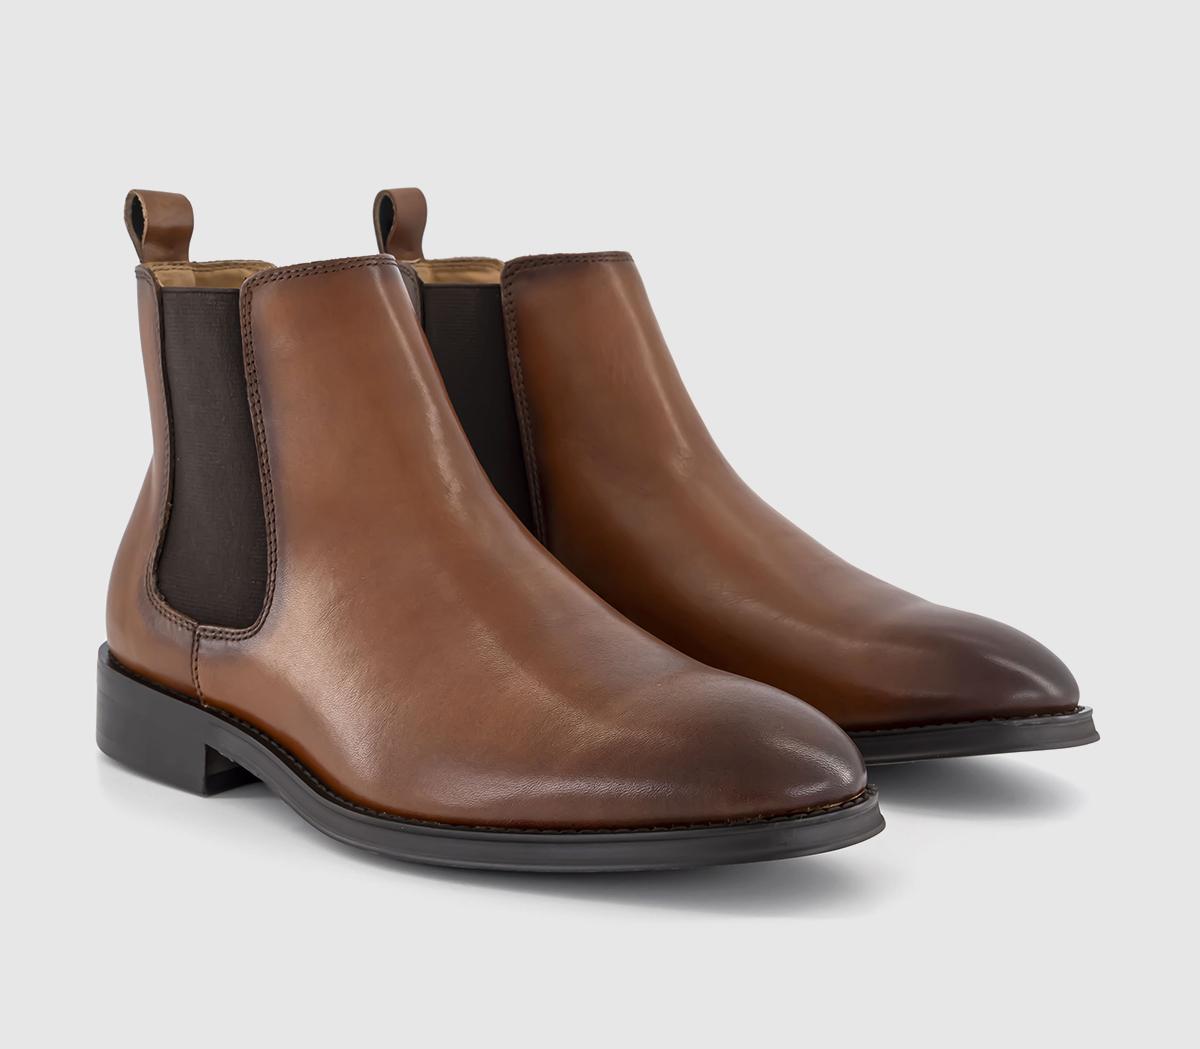 OFFICE Blenheim Chelsea Boots Tan Leather, 9